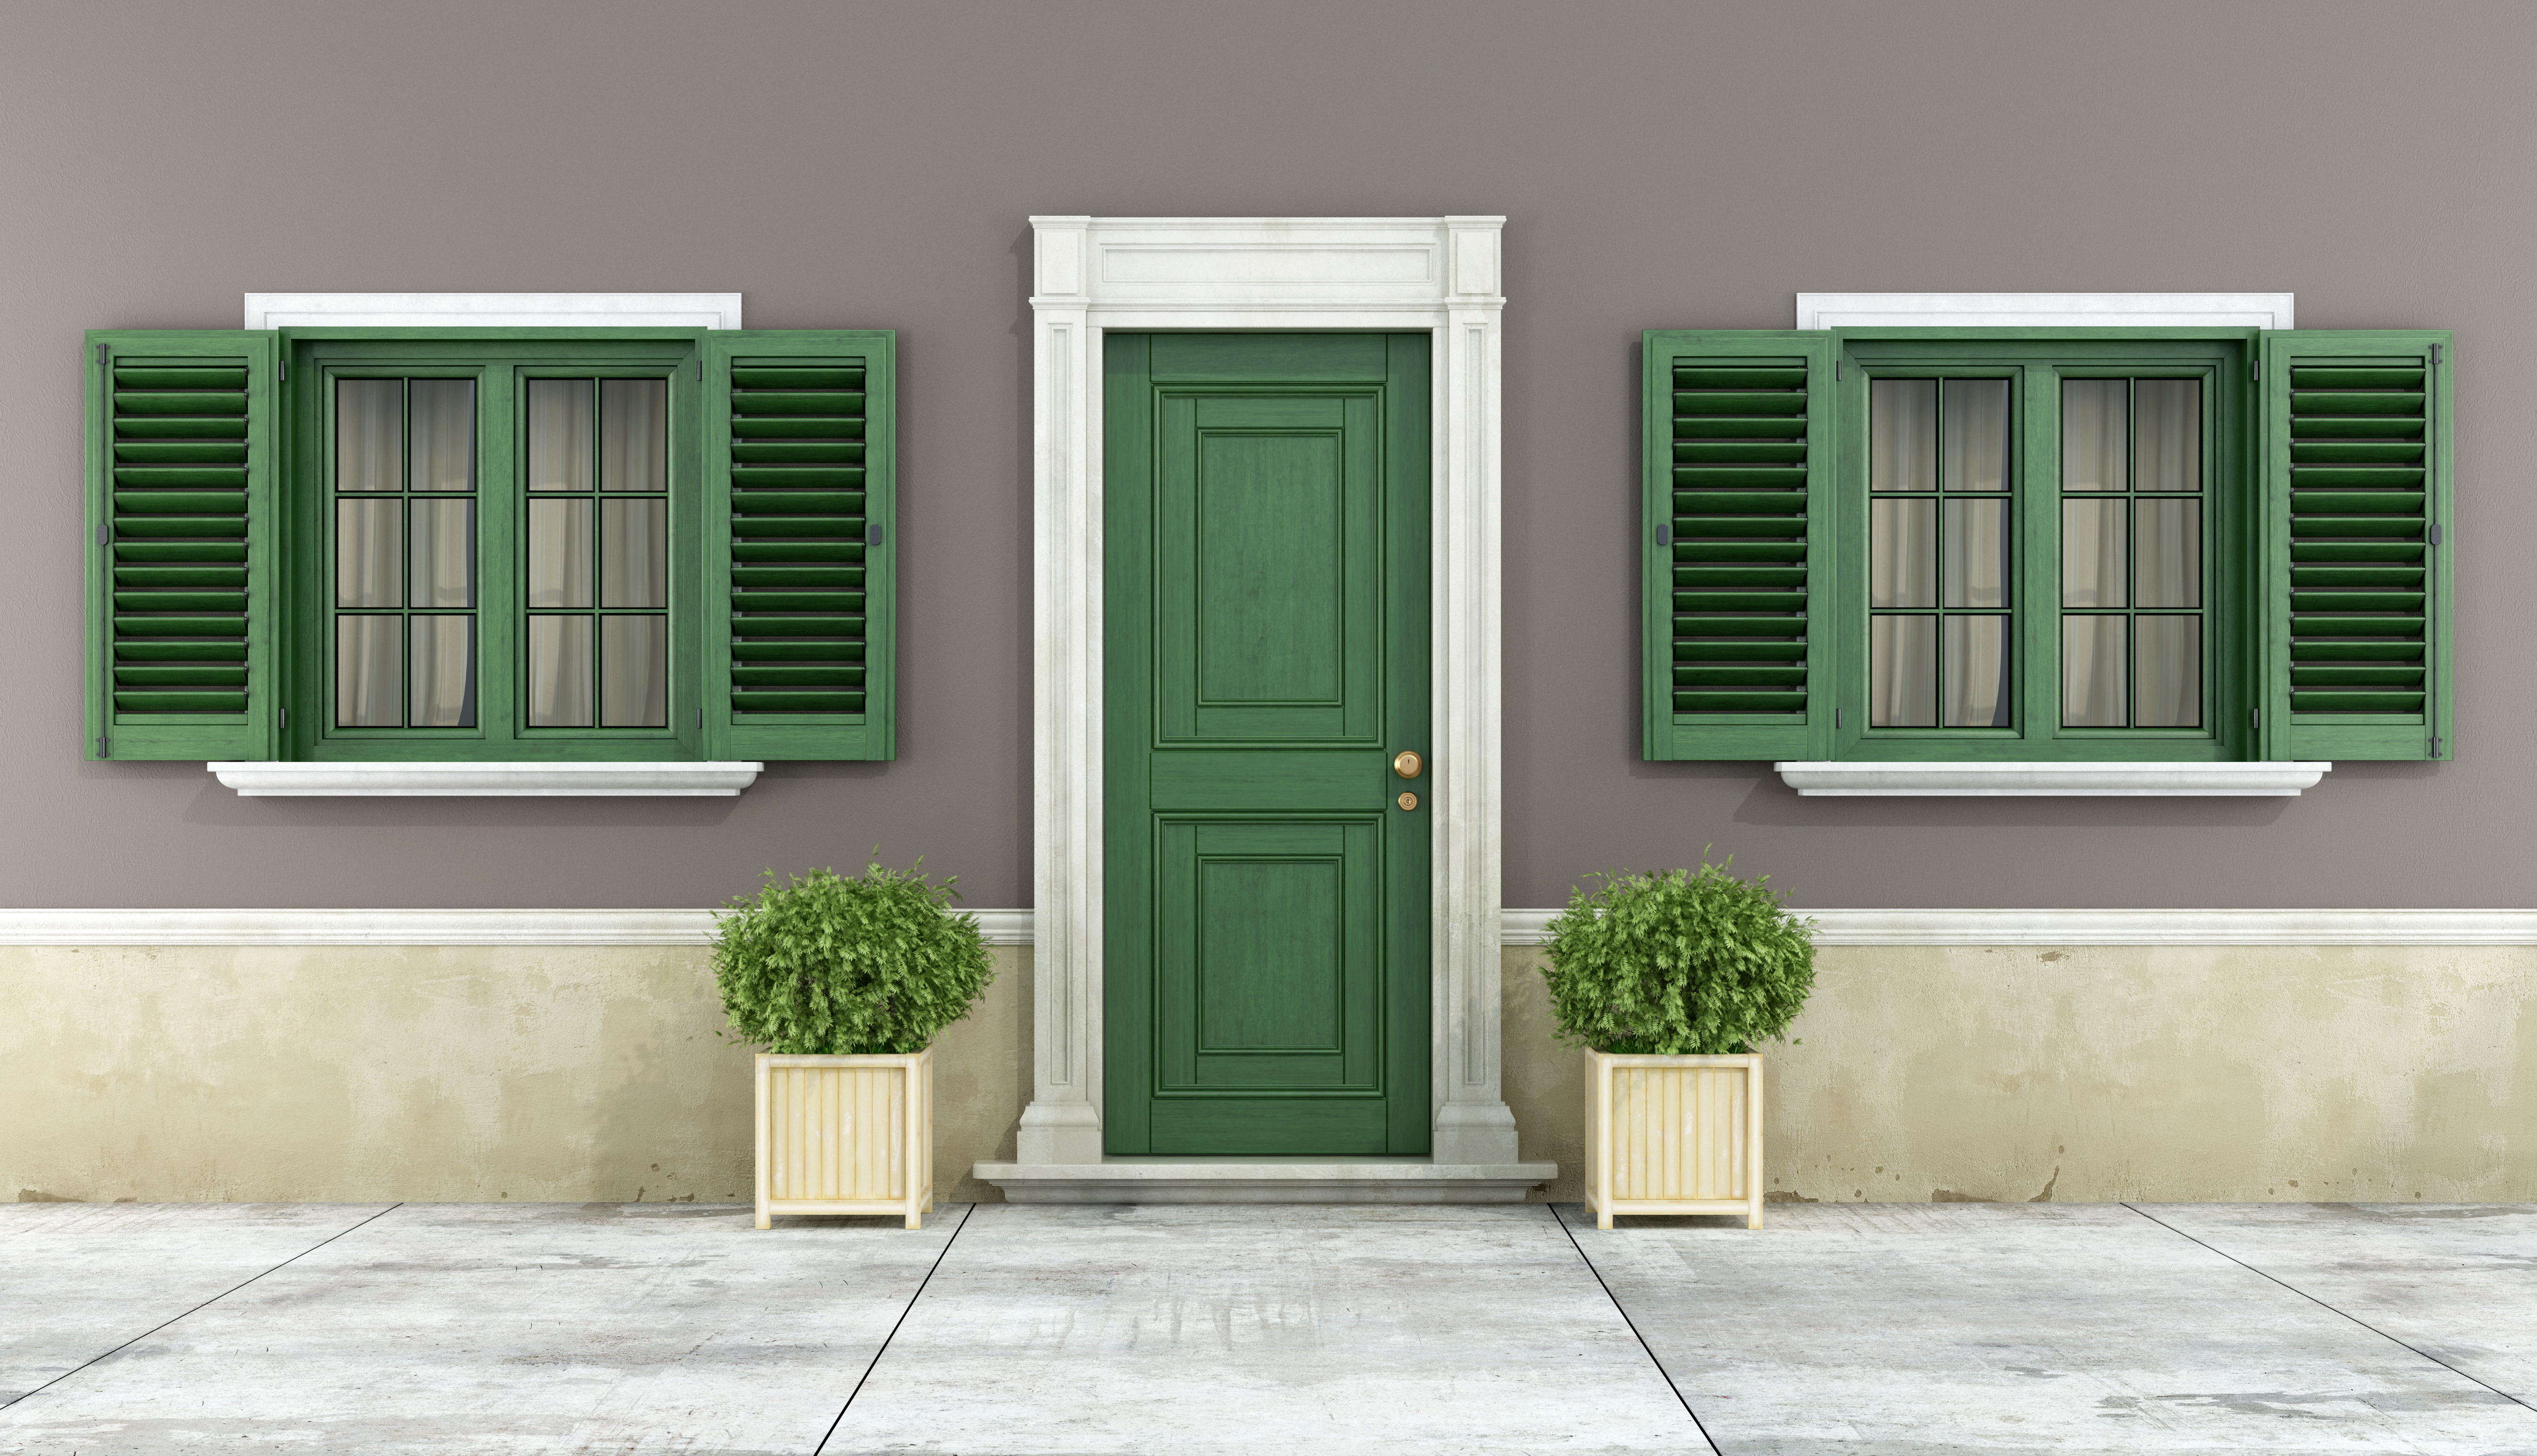 Detail of a classic house with green wooden windows and front door - rendering